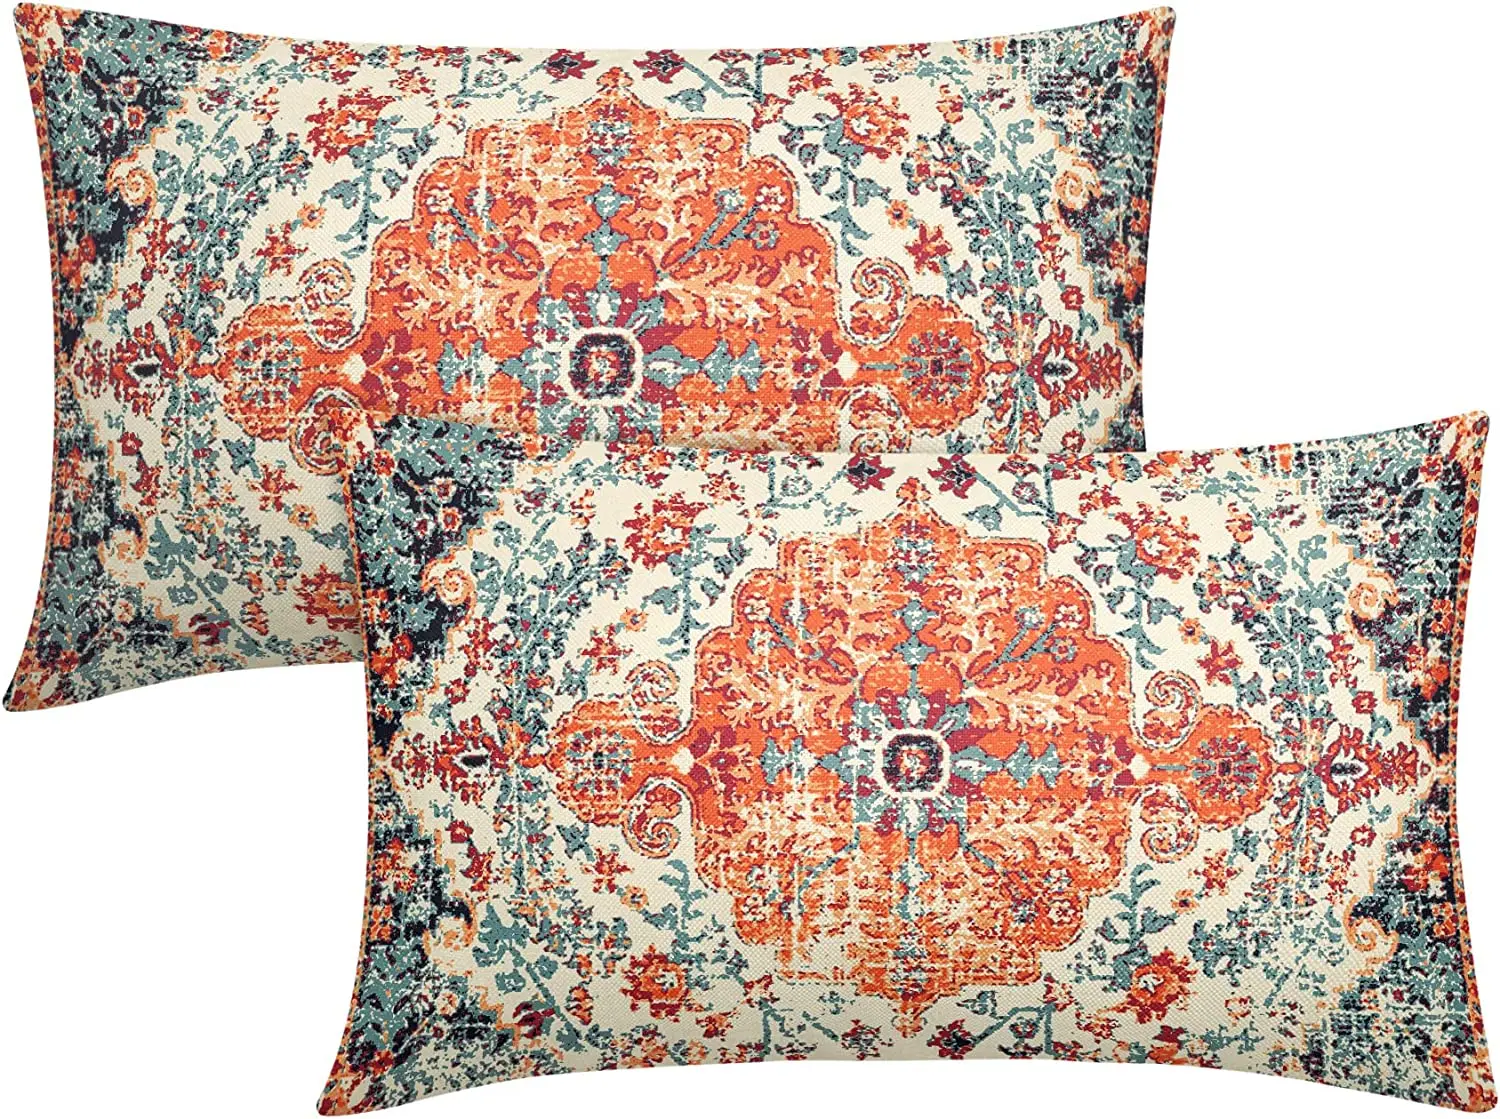 

Orange Blue Ethnic Boho Pillow Covers Inch Bohemian Carpet Vintage Couch Cases Rust Coral Floral Throw Pillows Set